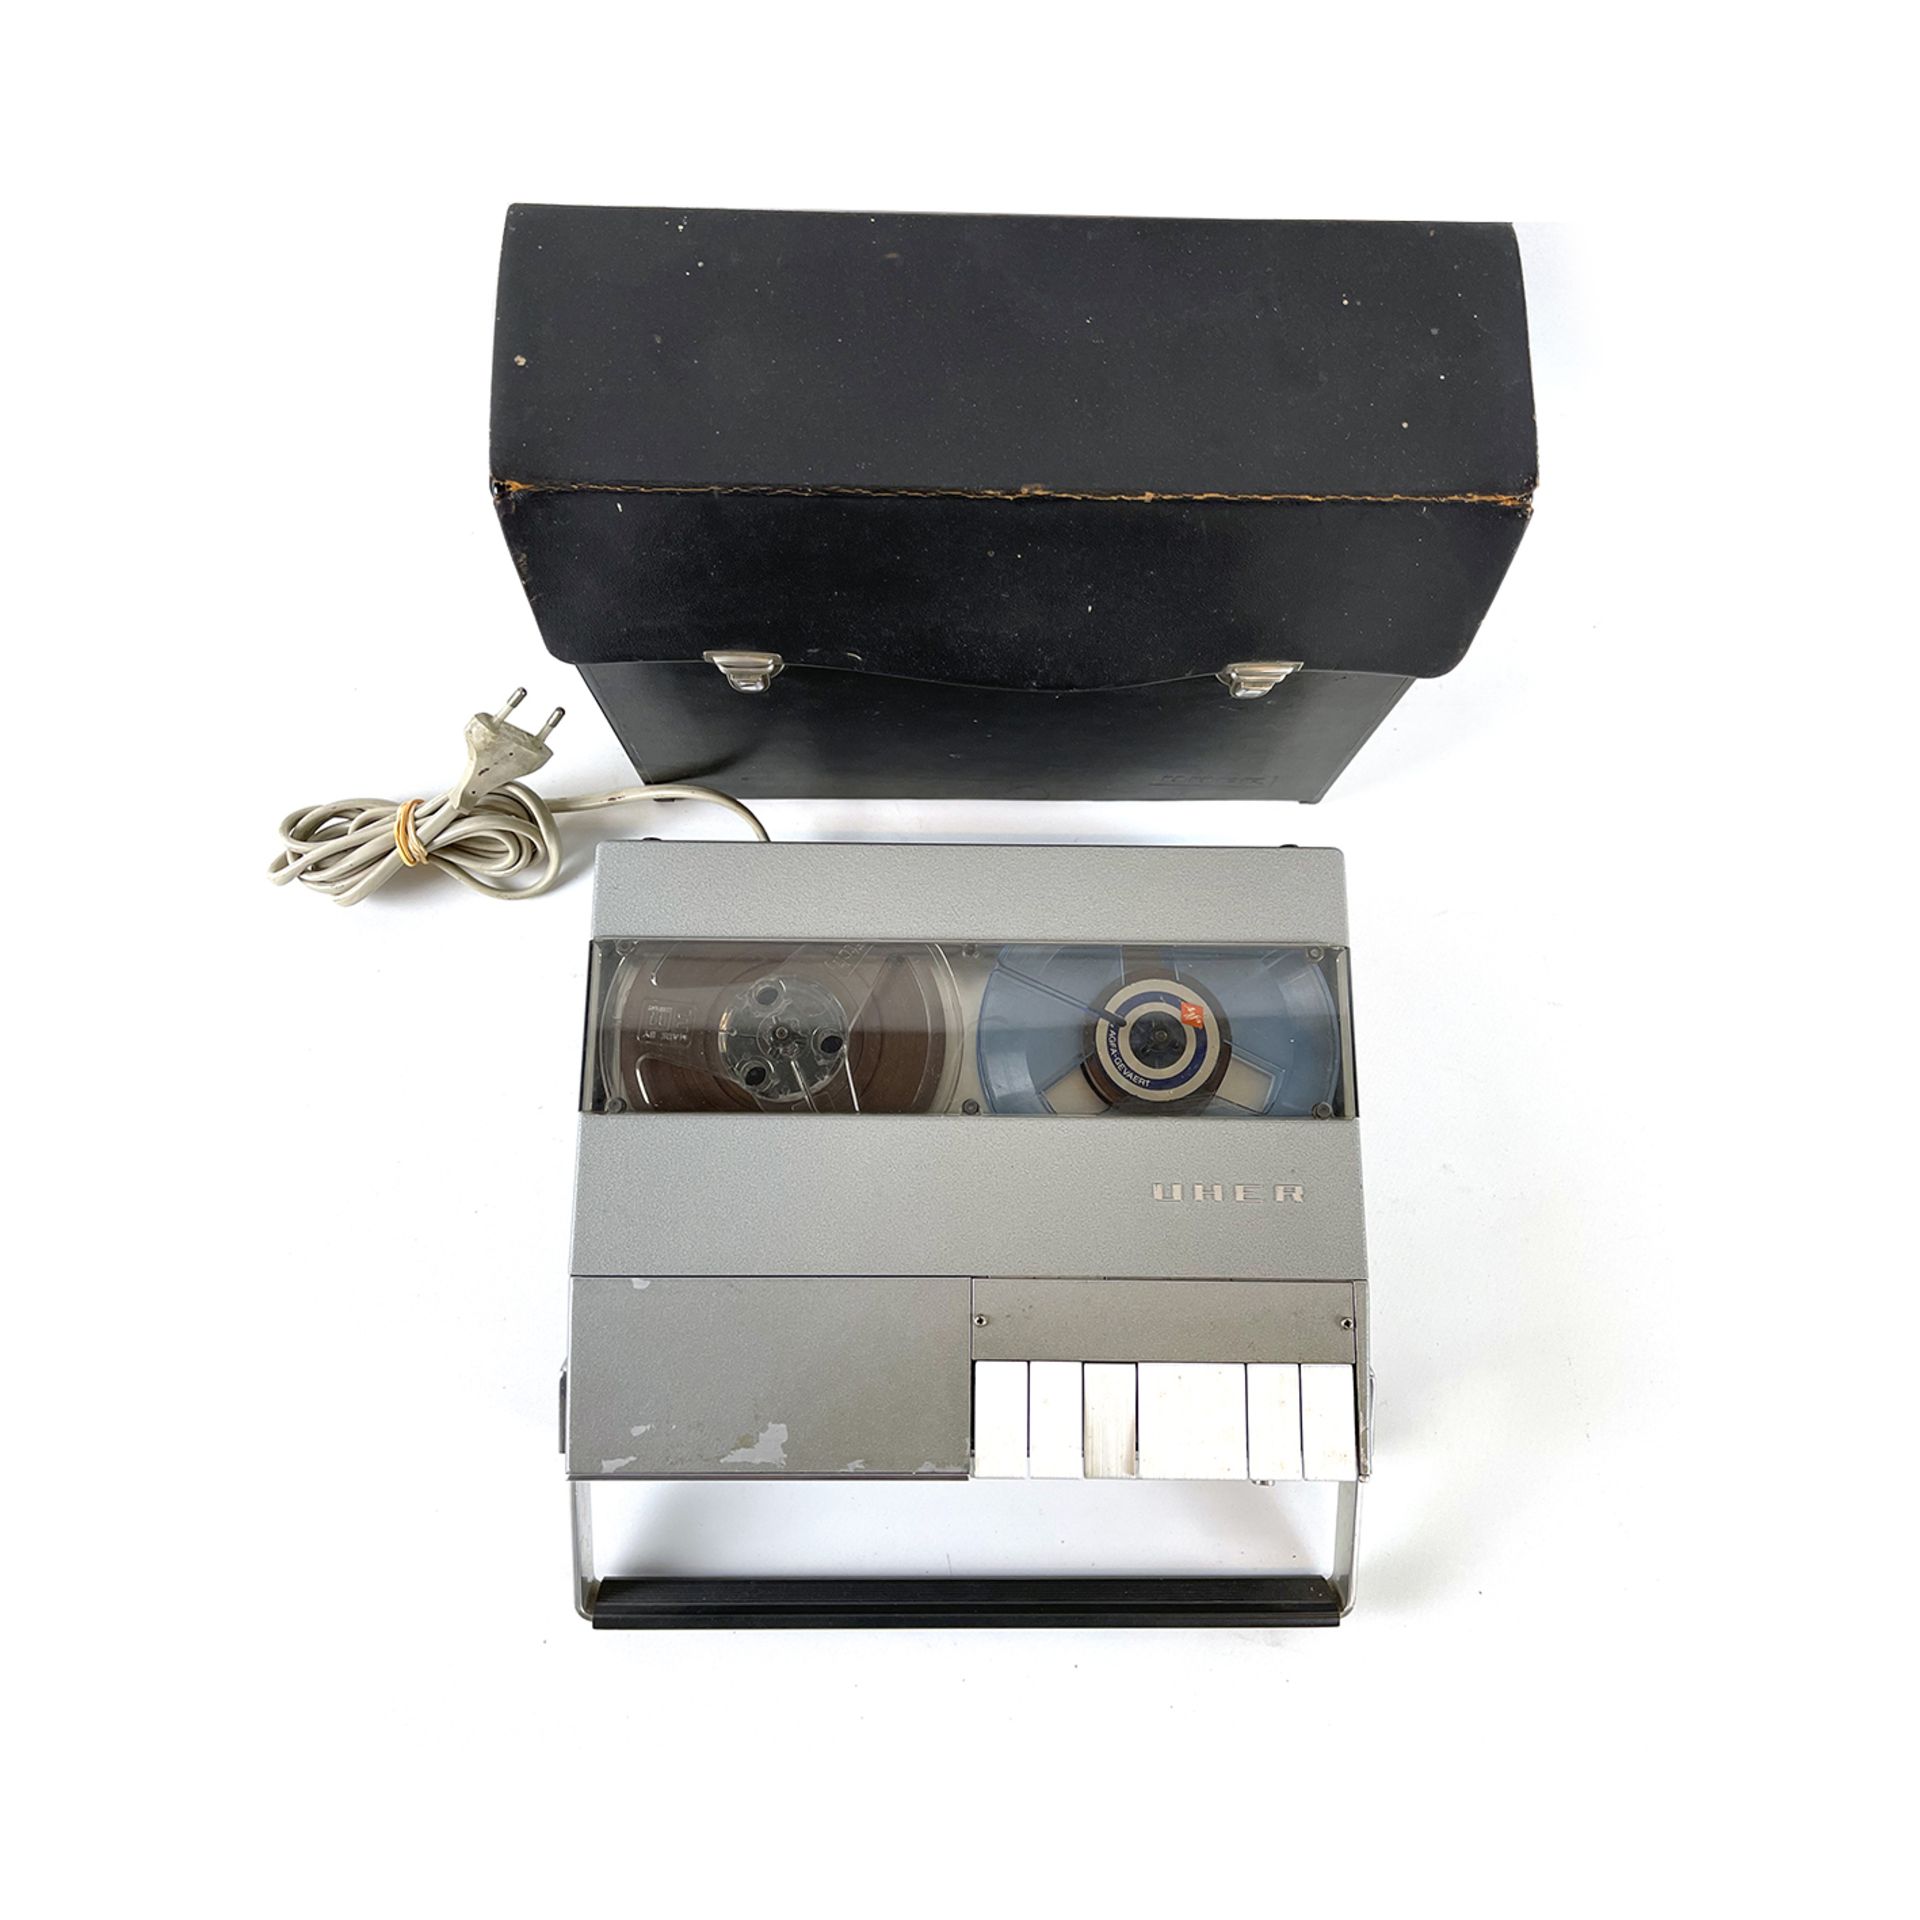 Uher Report 4000 IC Tape Recorder, 1972-1975, Germany - Image 2 of 3